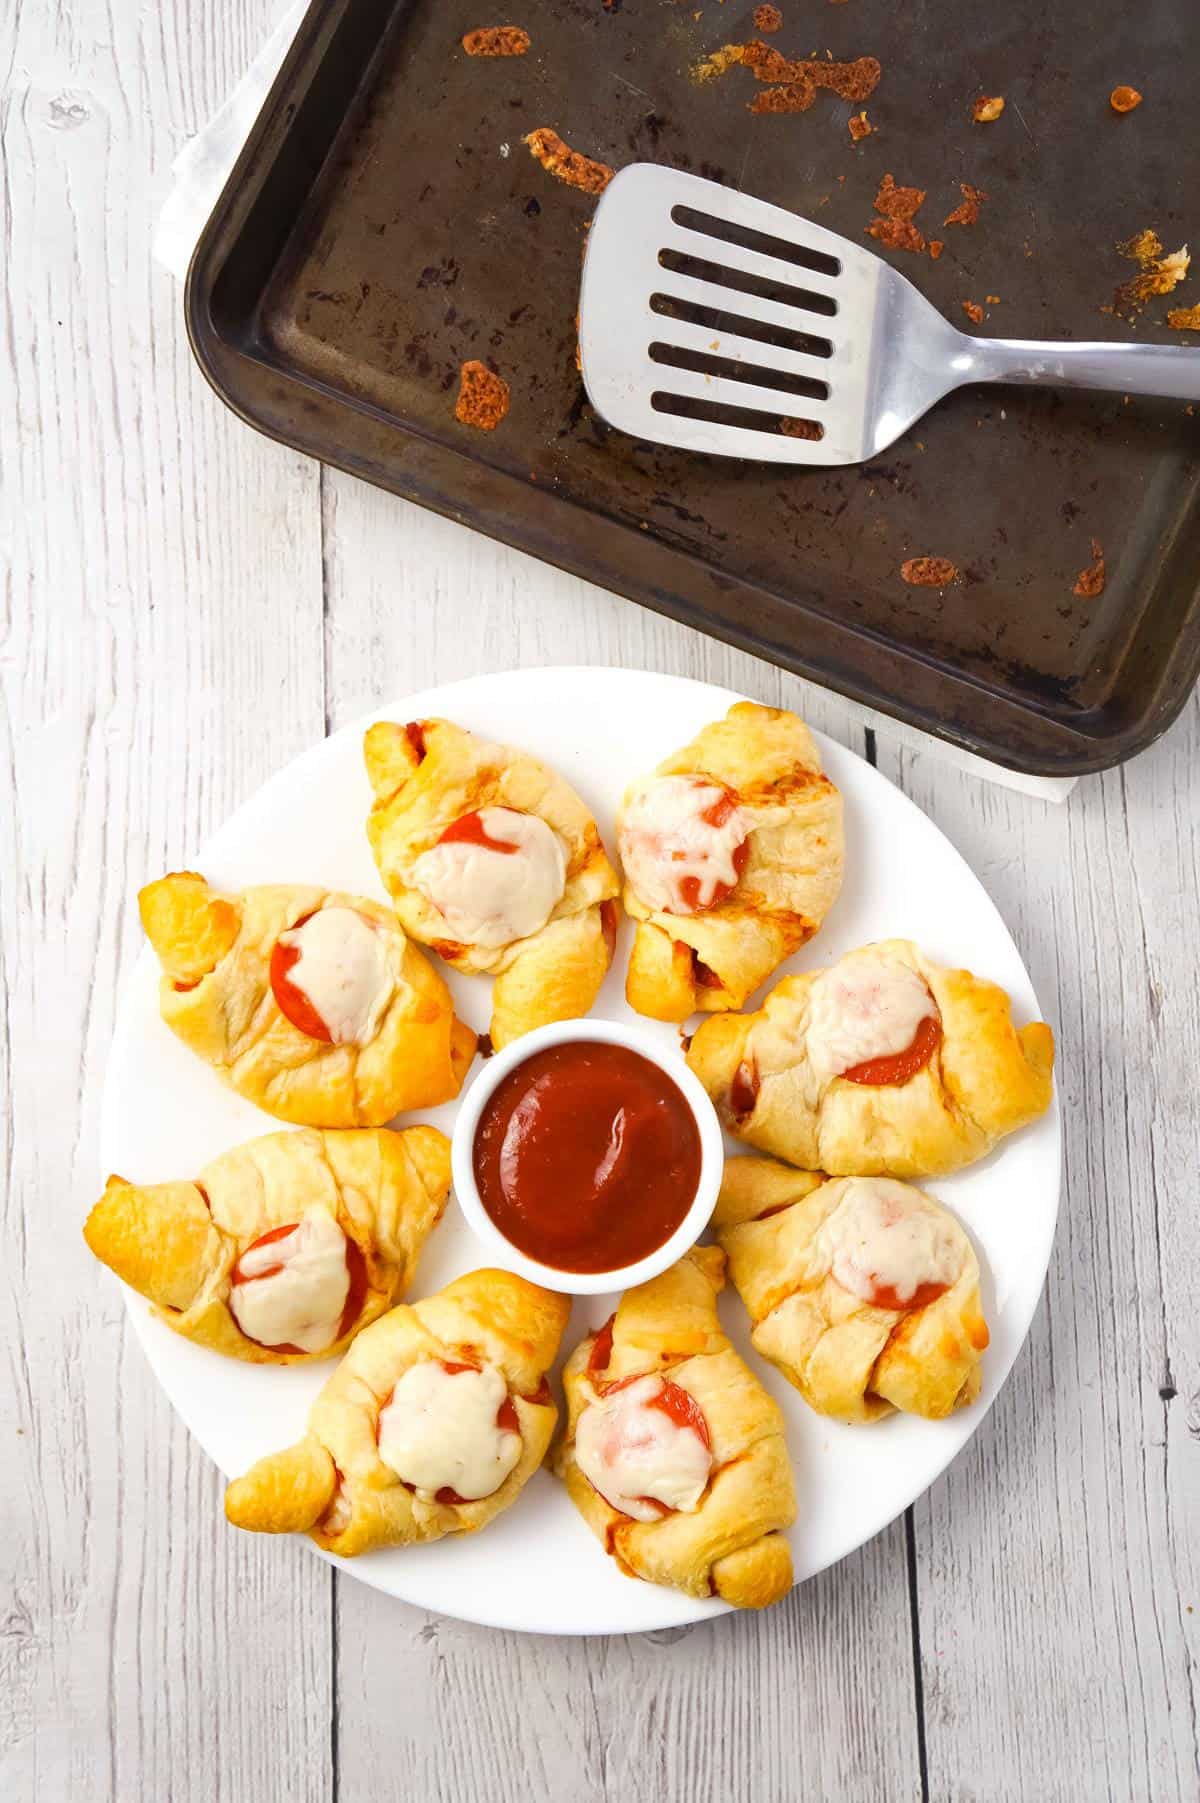 Pizza Crescent Rolls are an easy dinner or party snack recipe using Pillsbury crescent rolls, pepperoni, mozzarella cheese and pizza sauce.